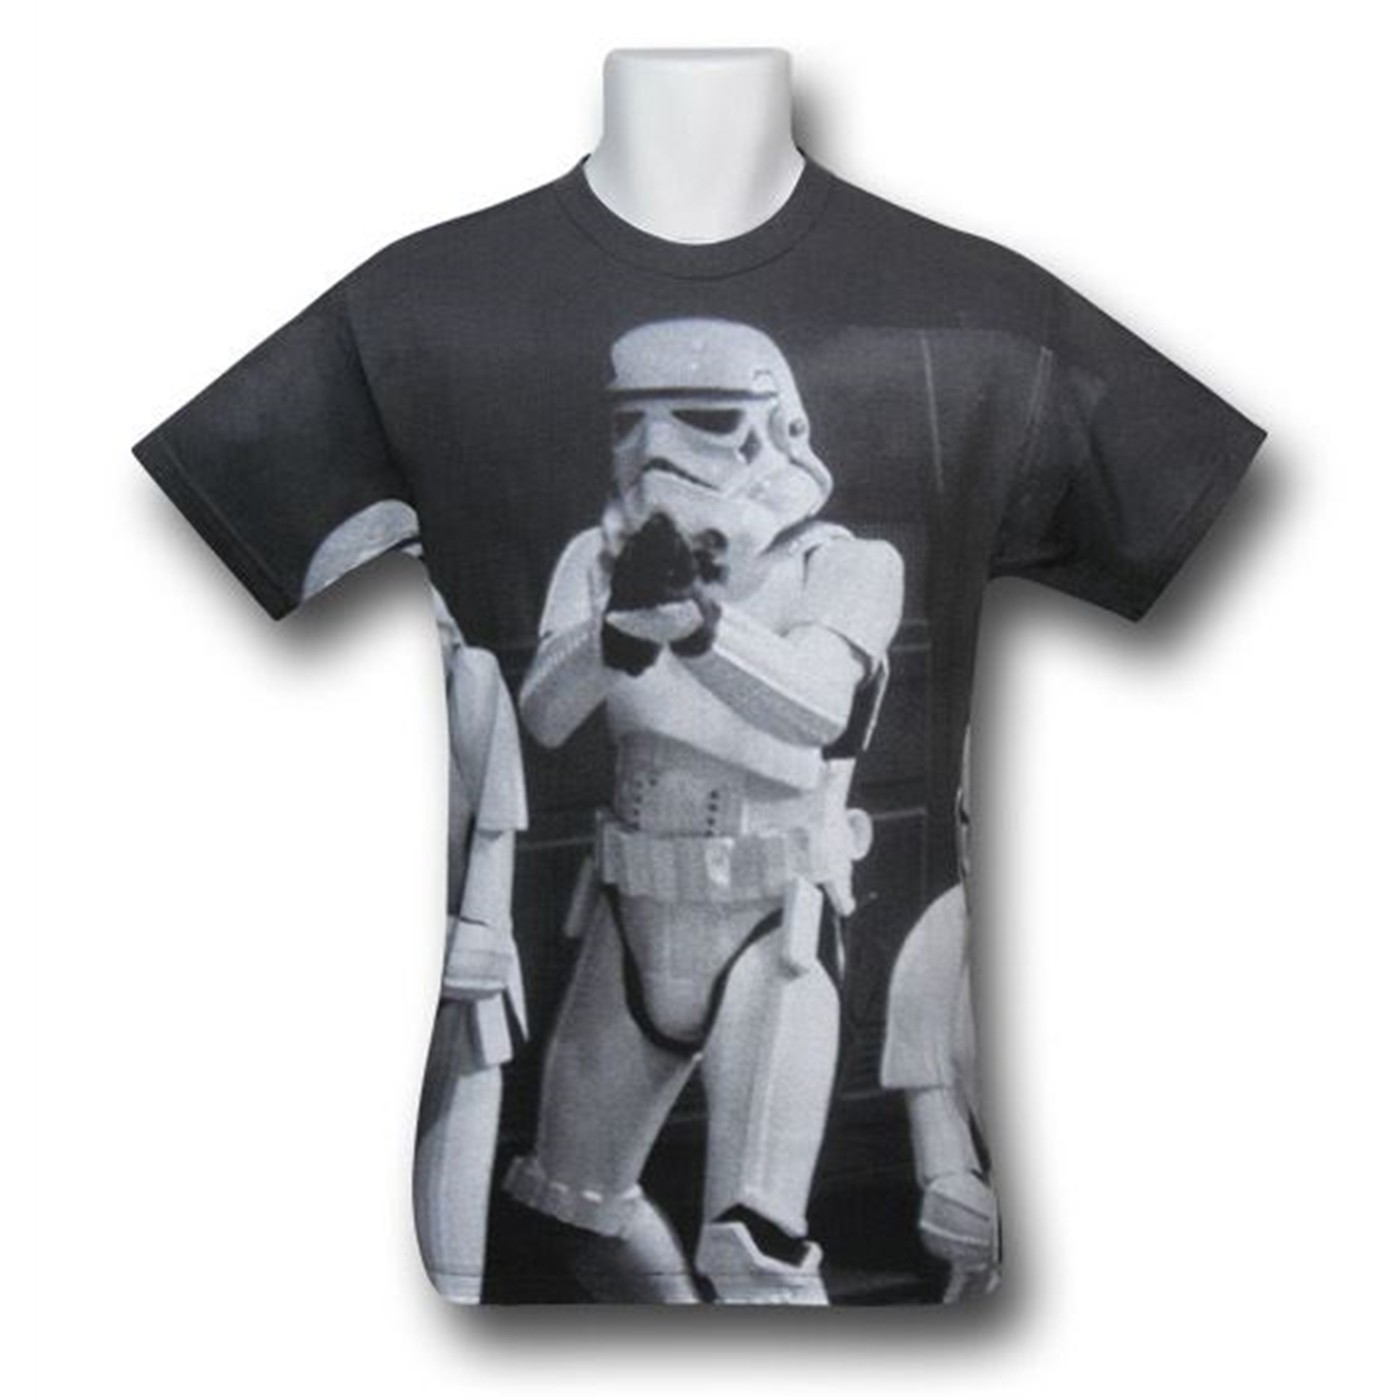 Stormtroopers Galactic Assault Glowing Sublimated T-Shirt